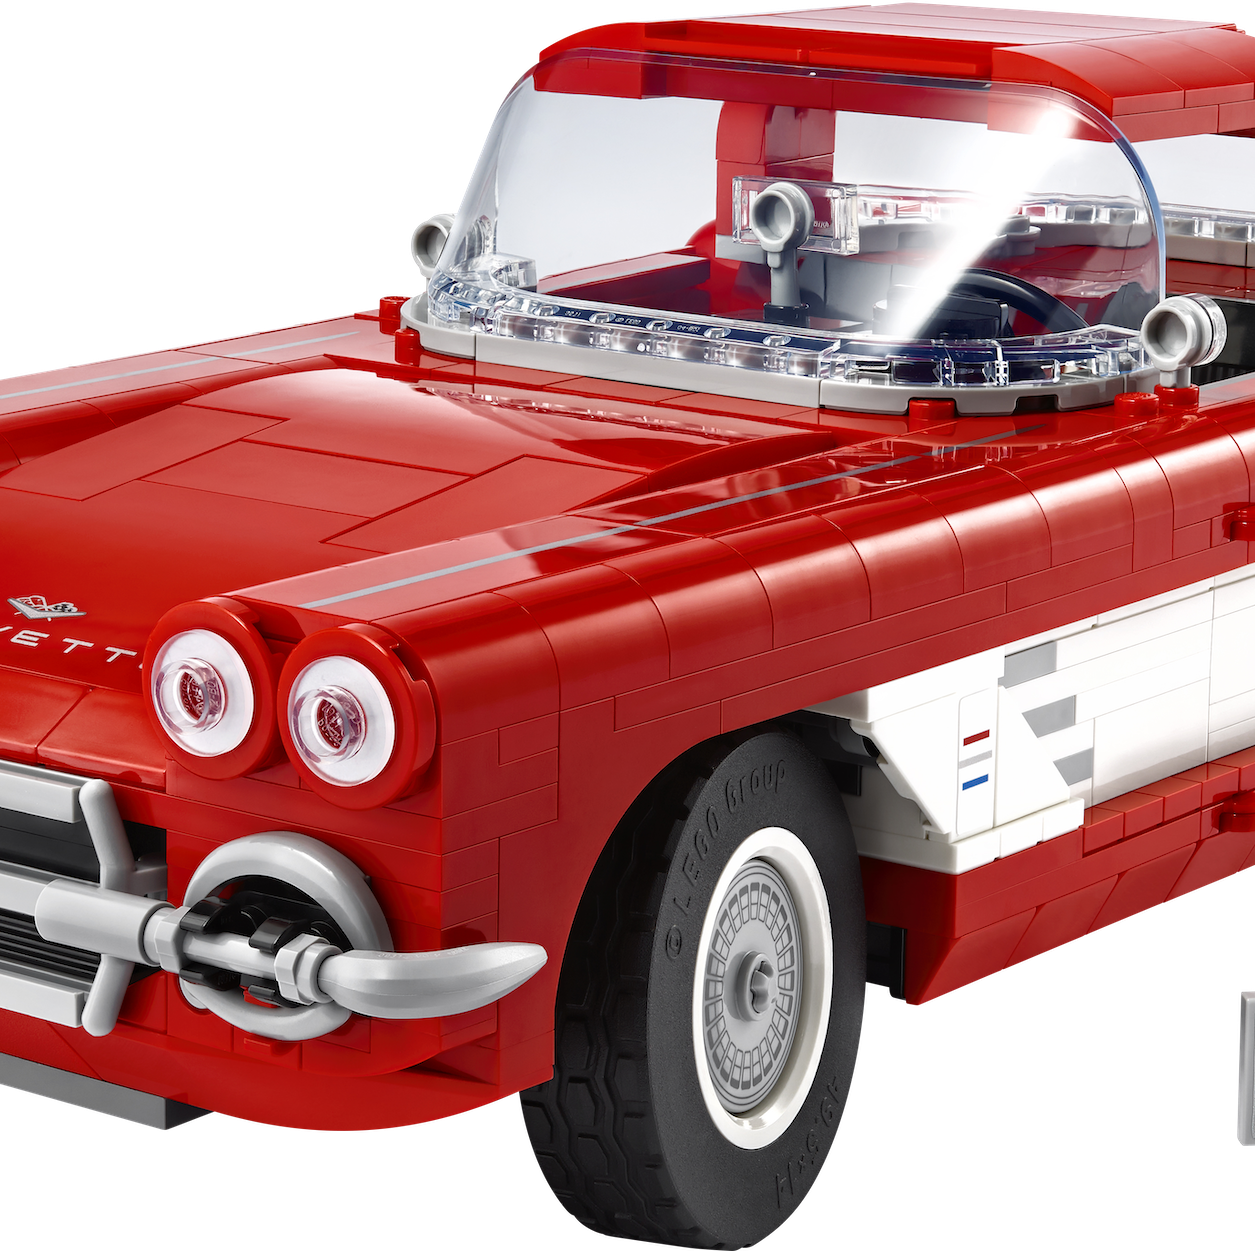 Live Out Your Classic Car Fantasies With This Corvette Lego Set